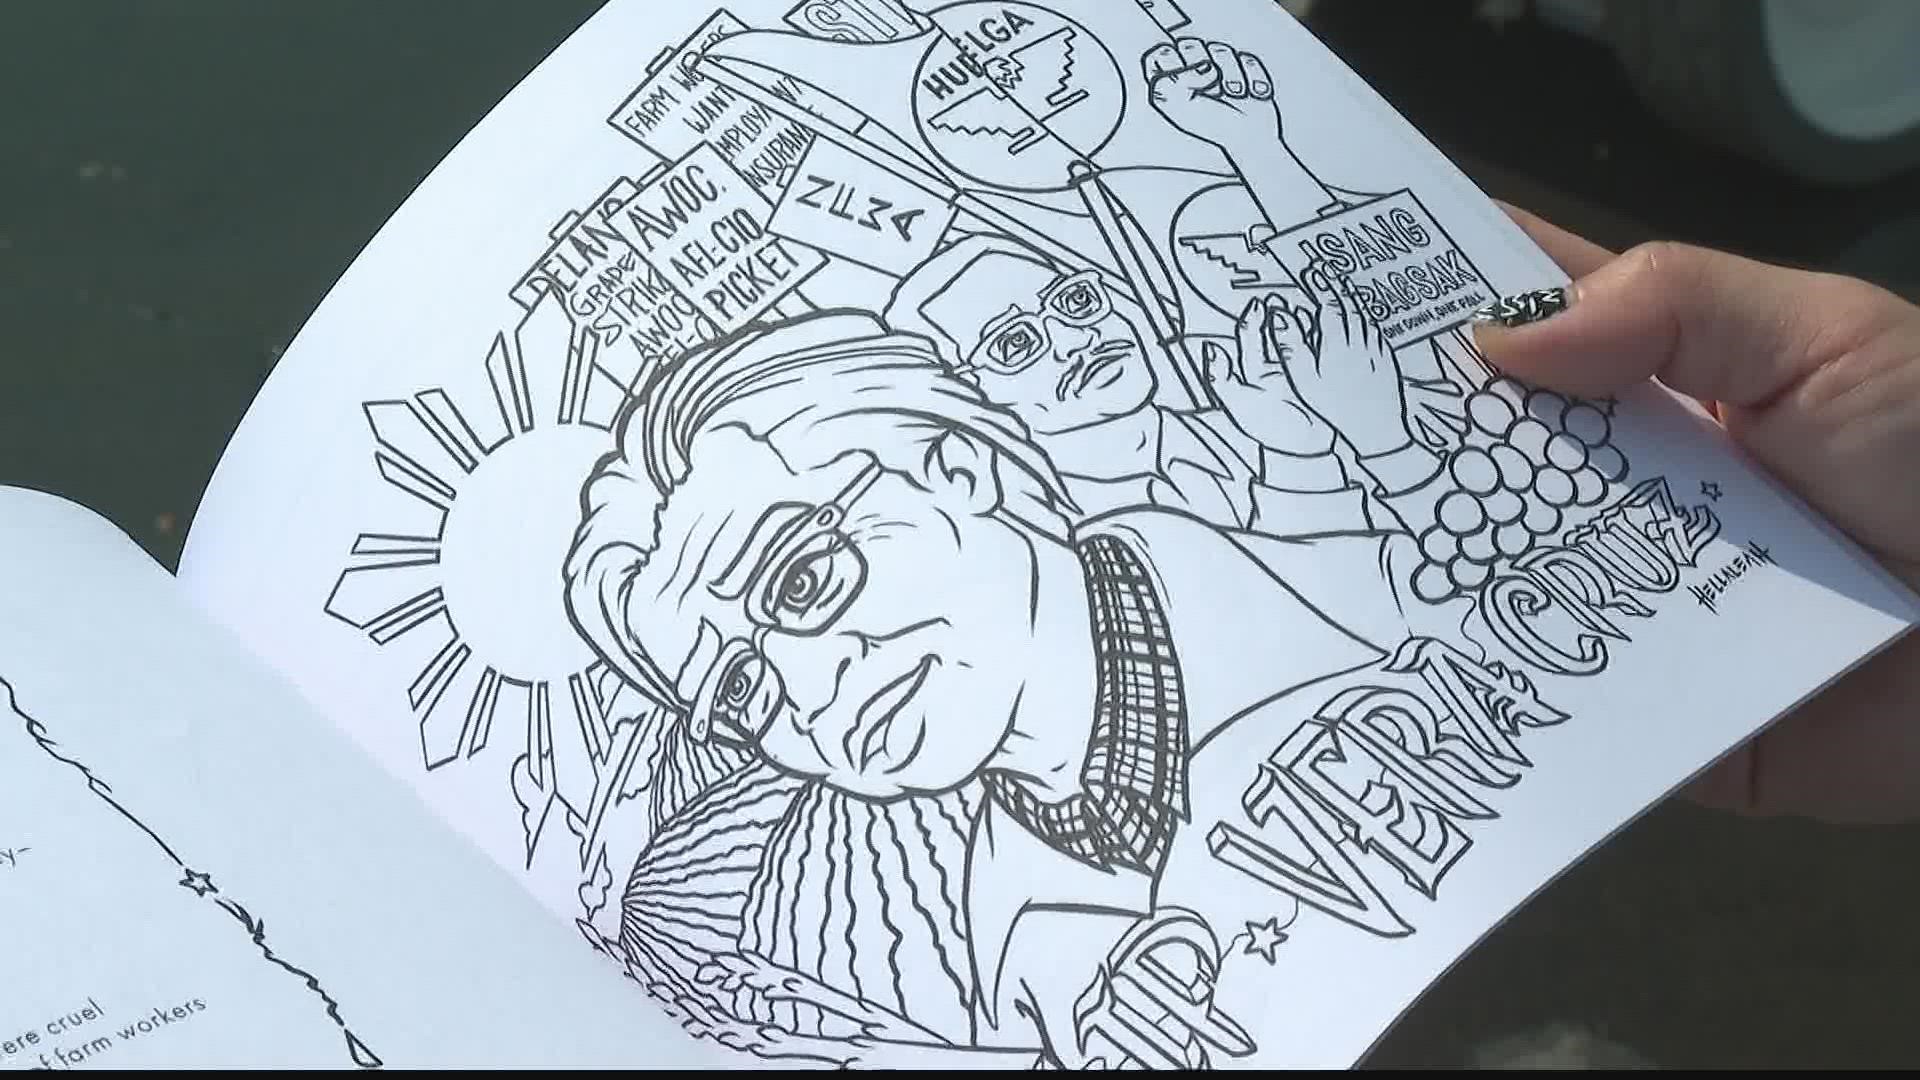 The Asian American Advocacy Fund created a coloring book to help empower members of the Asian community and teach others about their history and culture.